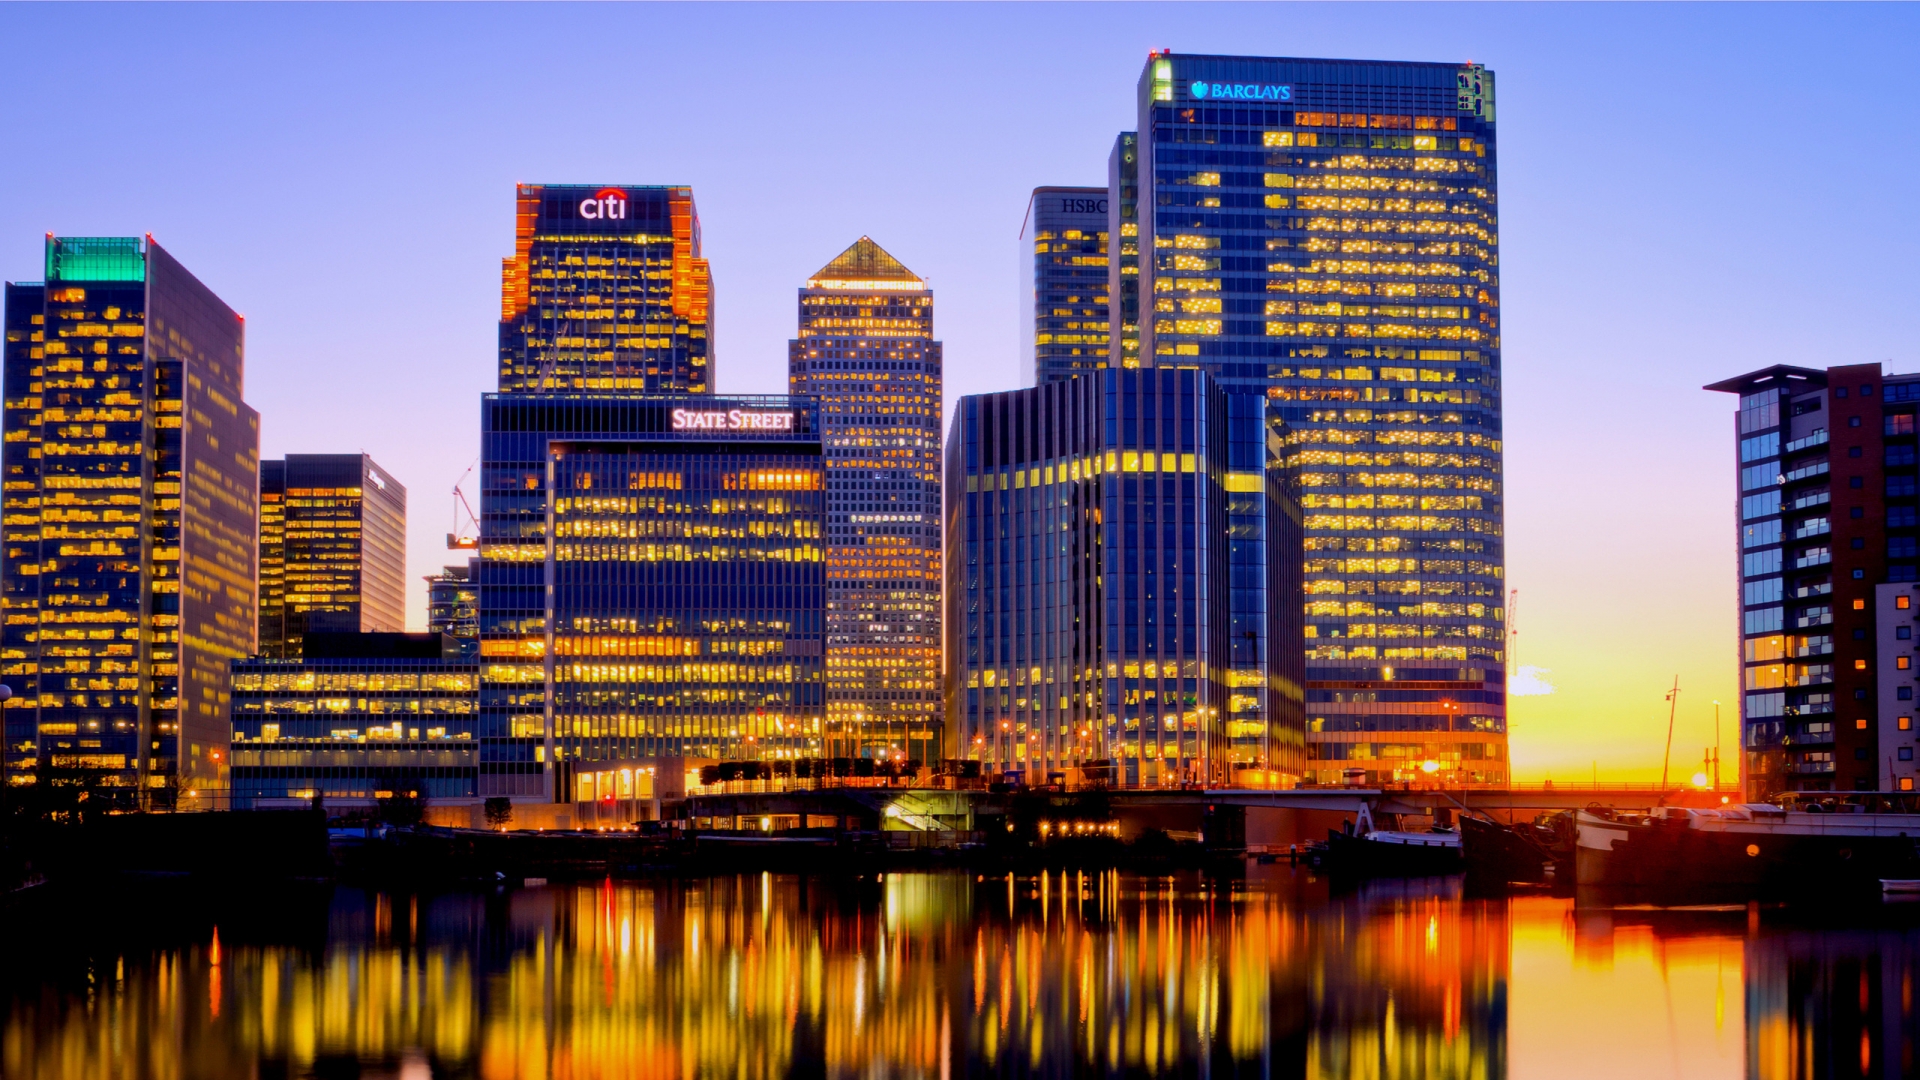 London Canary Wharf for 1920 x 1080 HDTV 1080p resolution